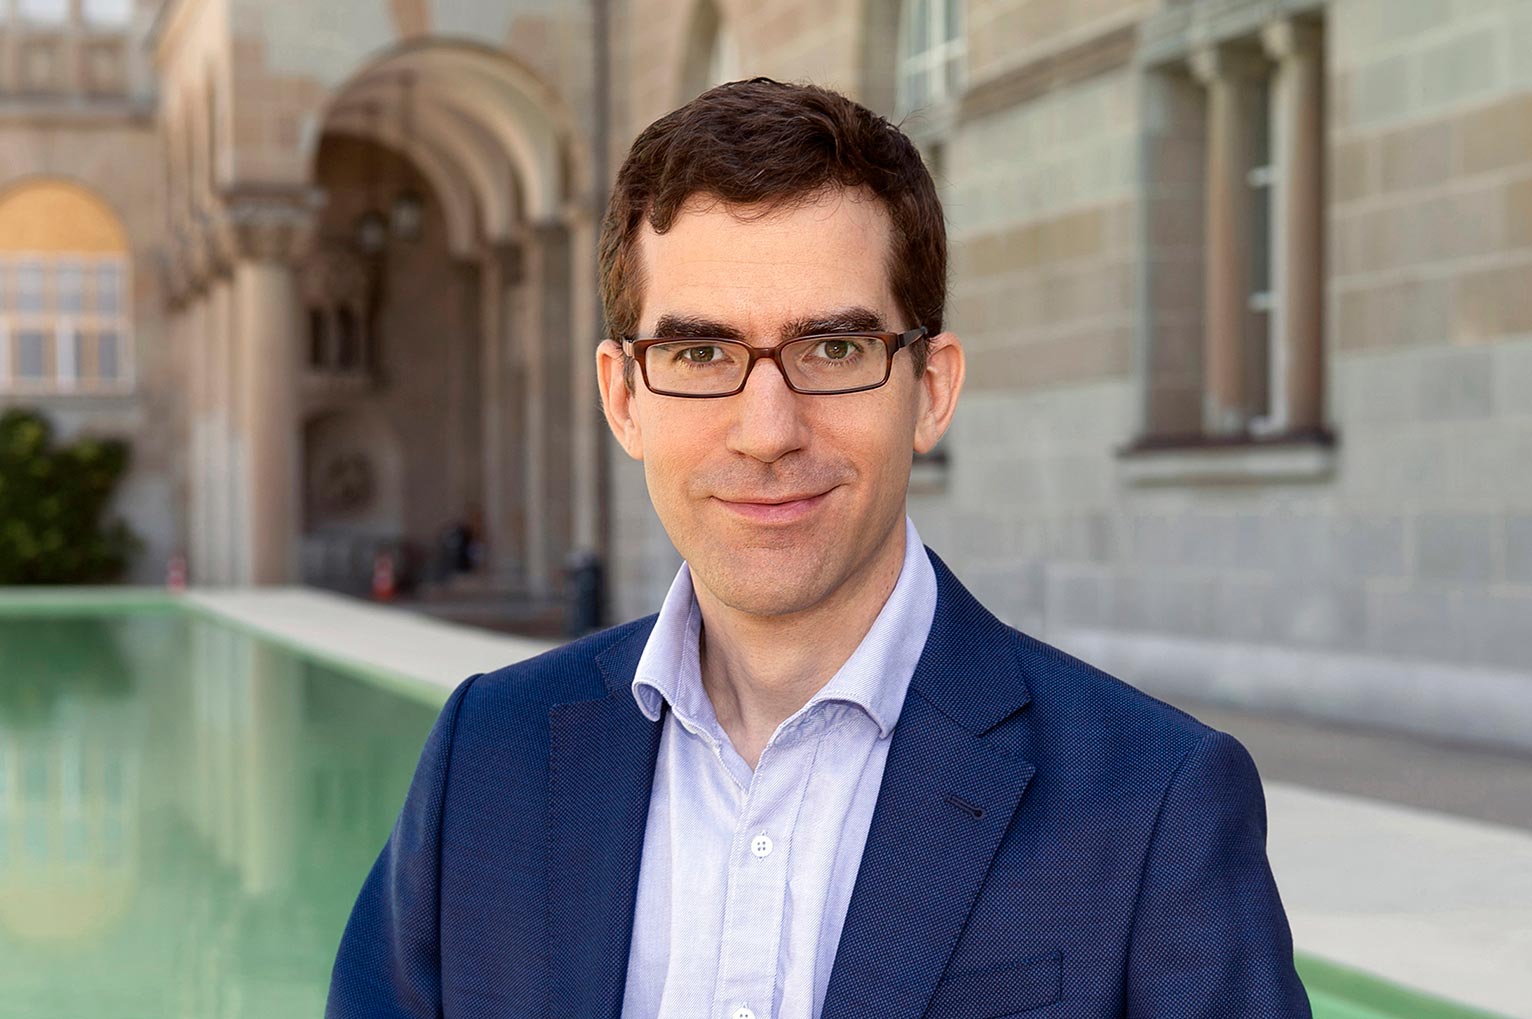 David Dorn is UBS Foundation Professor of globalization and labor markets and co-director of the University Research Priority Program Equality of Opportunity at the University of Zurich